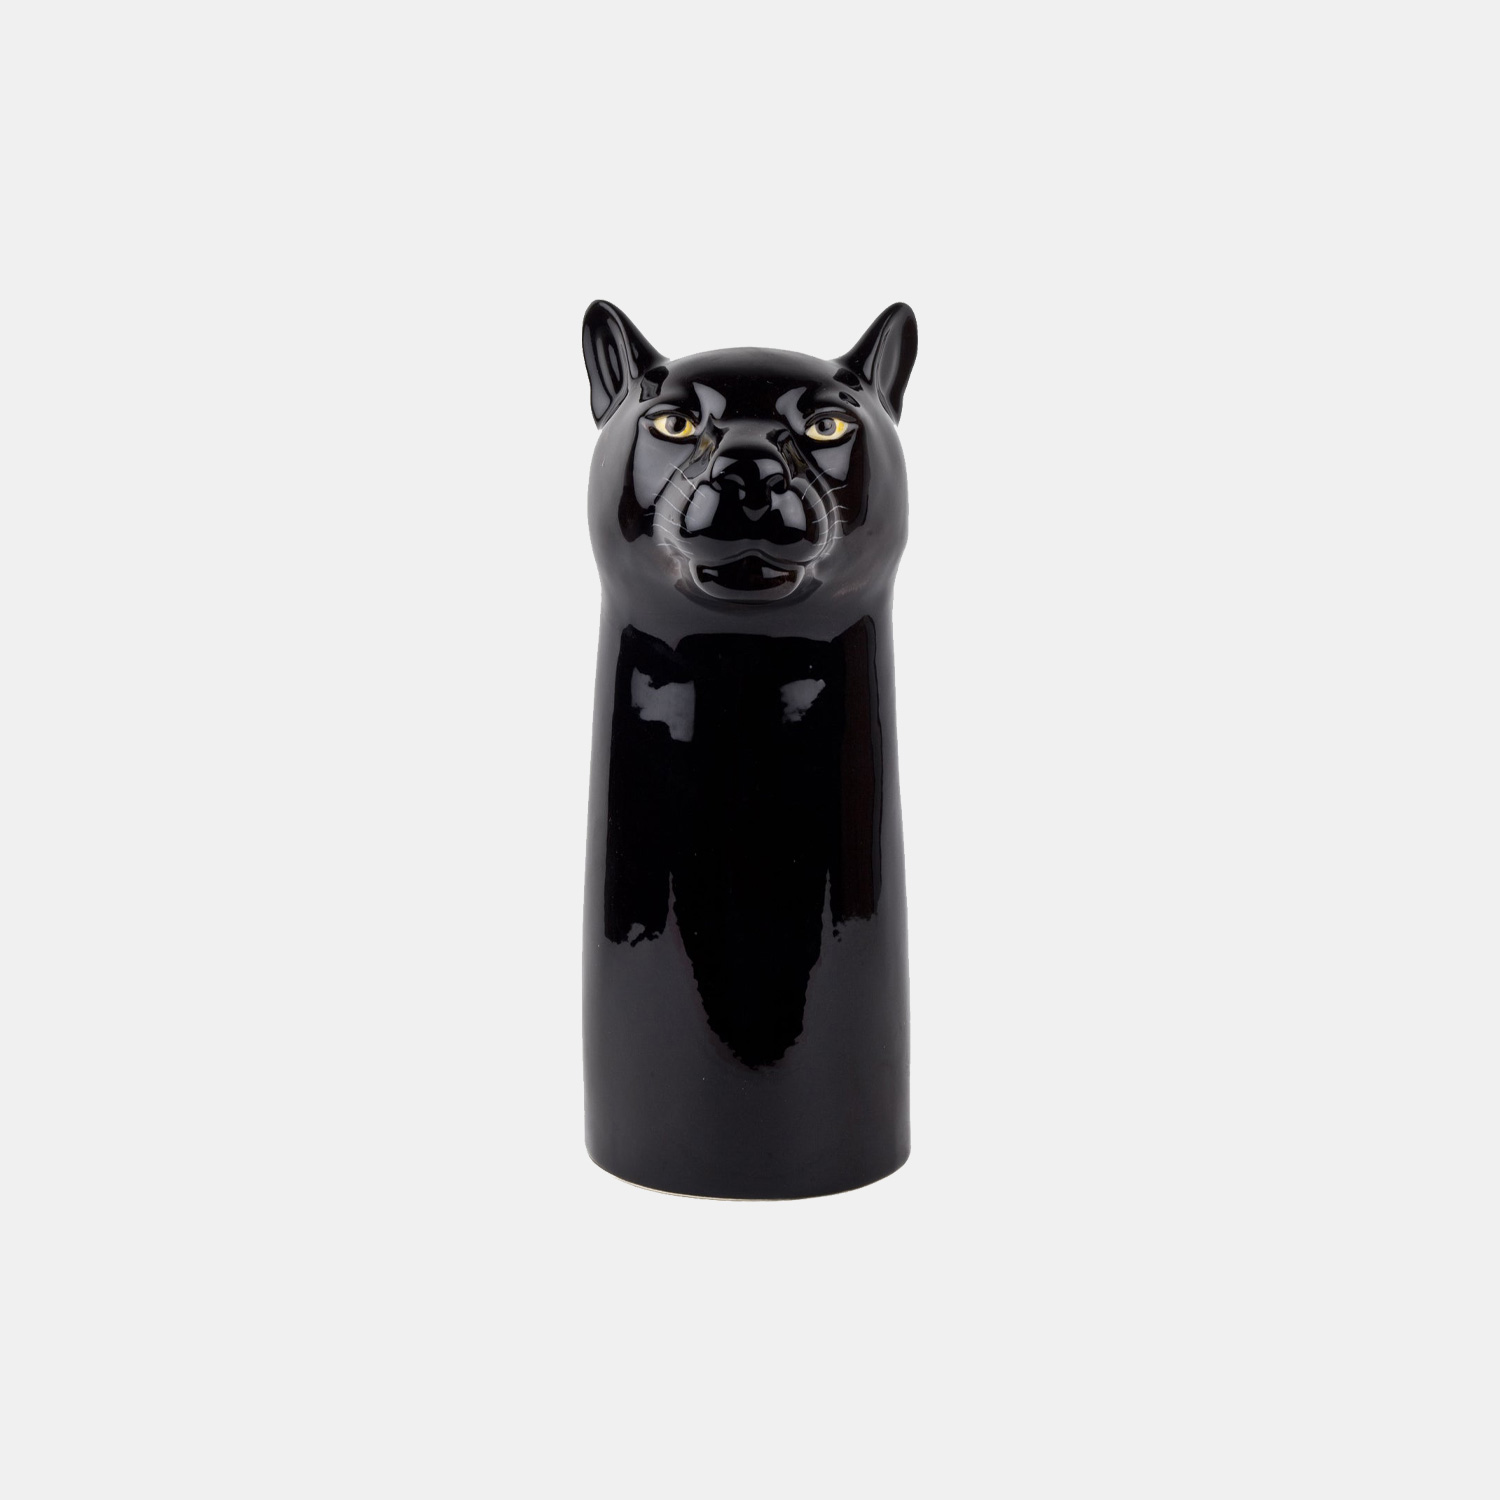 Cute Animal Vases & More - Shop Our Vase Collection Online